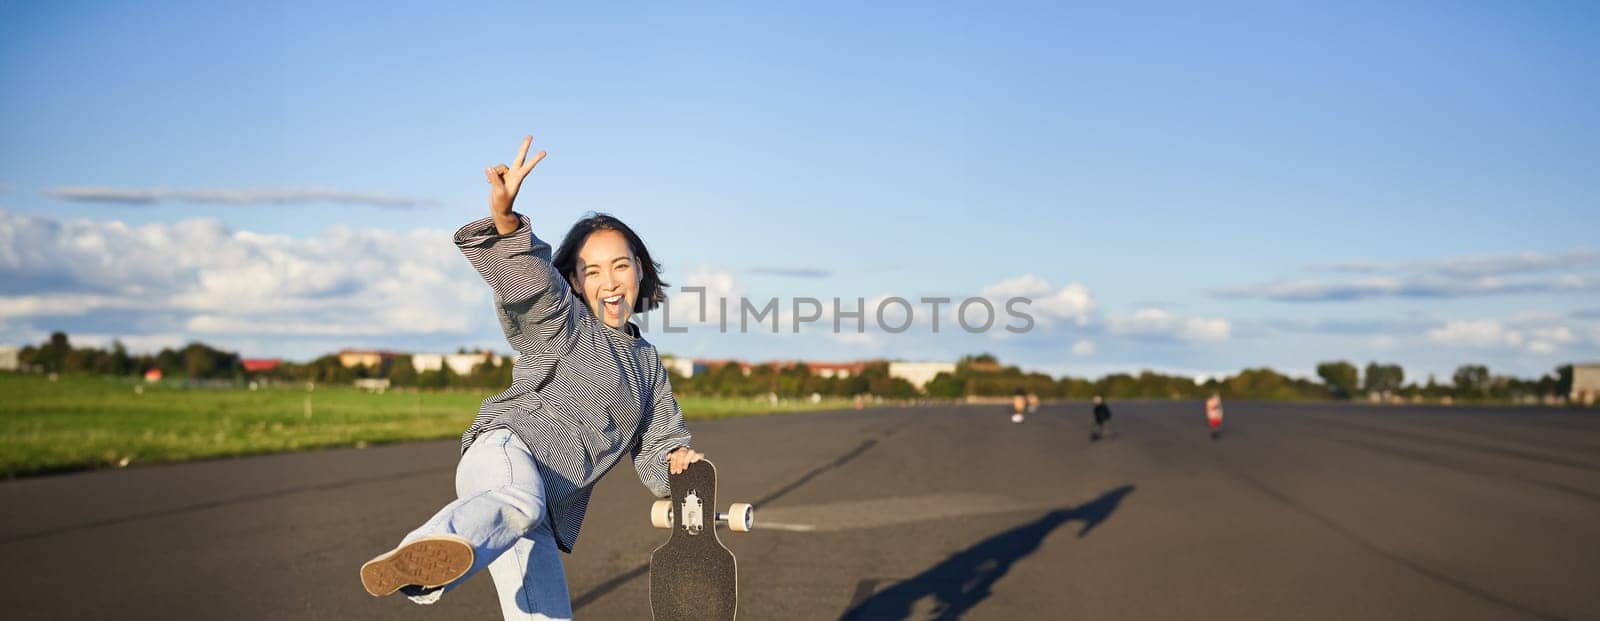 Vertical shot of happy asian skater girl, jumping, standing with skateboard and smiling. Woman skating on longboard and having fun.